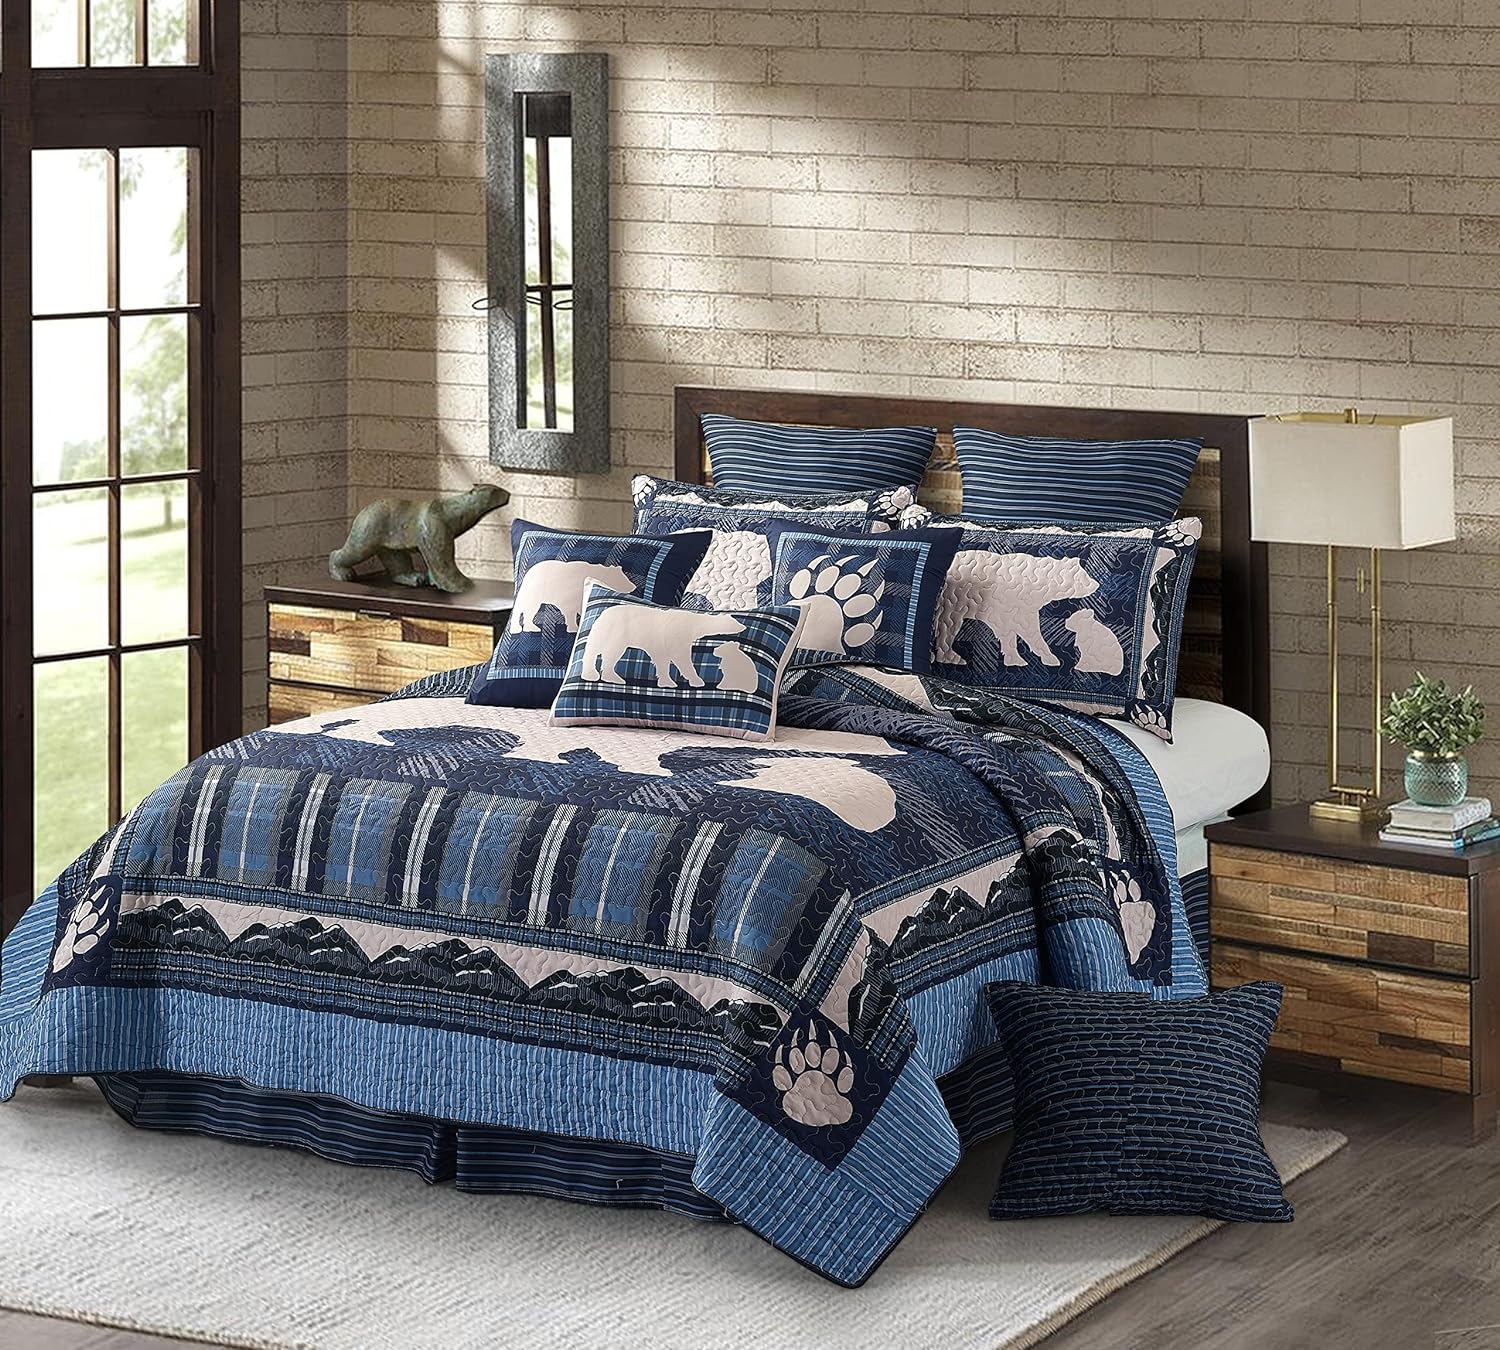 Virah Bella 2 Piece Full/Queen Lodge Quilt Bedding Set - Rustic Country Reversible Comforter Set with Decorative Pillow Shams - Offspring